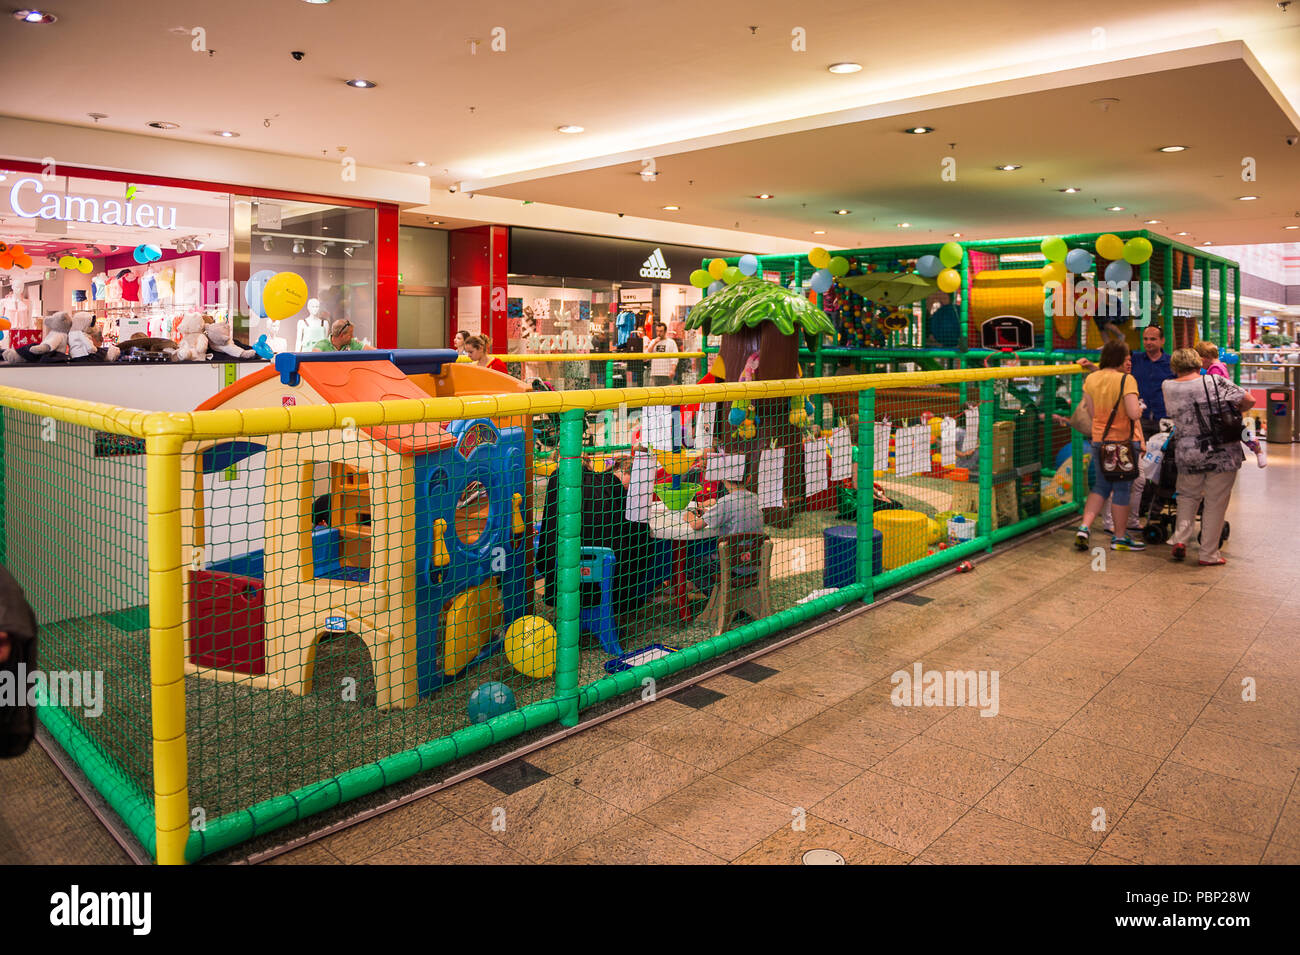 KRAKOW, POLAND - MAY 30, 2015: Children area in the Galeria Krakowska city  mall Krakow, Poland. Galeria Krakowska has 270 specialty shops, cafes, and  Stock Photo - Alamy